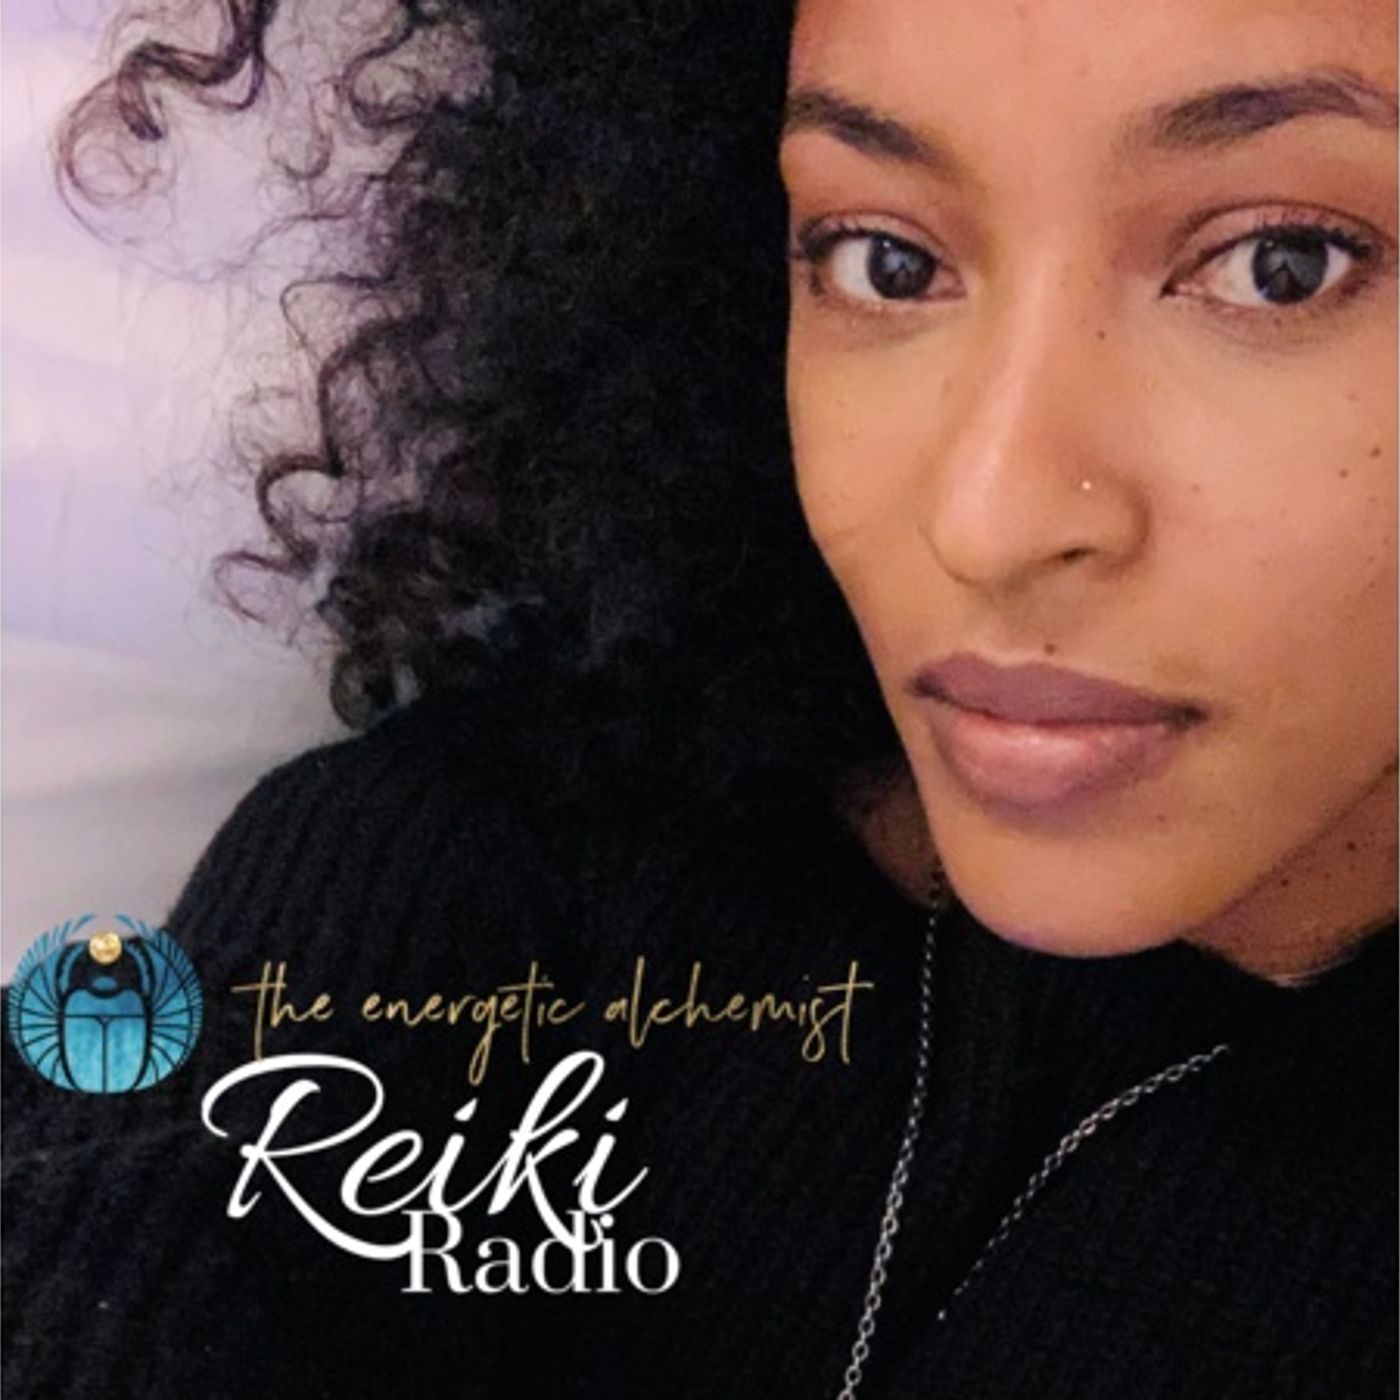 The Language of Lenormand, with Erika Robinson